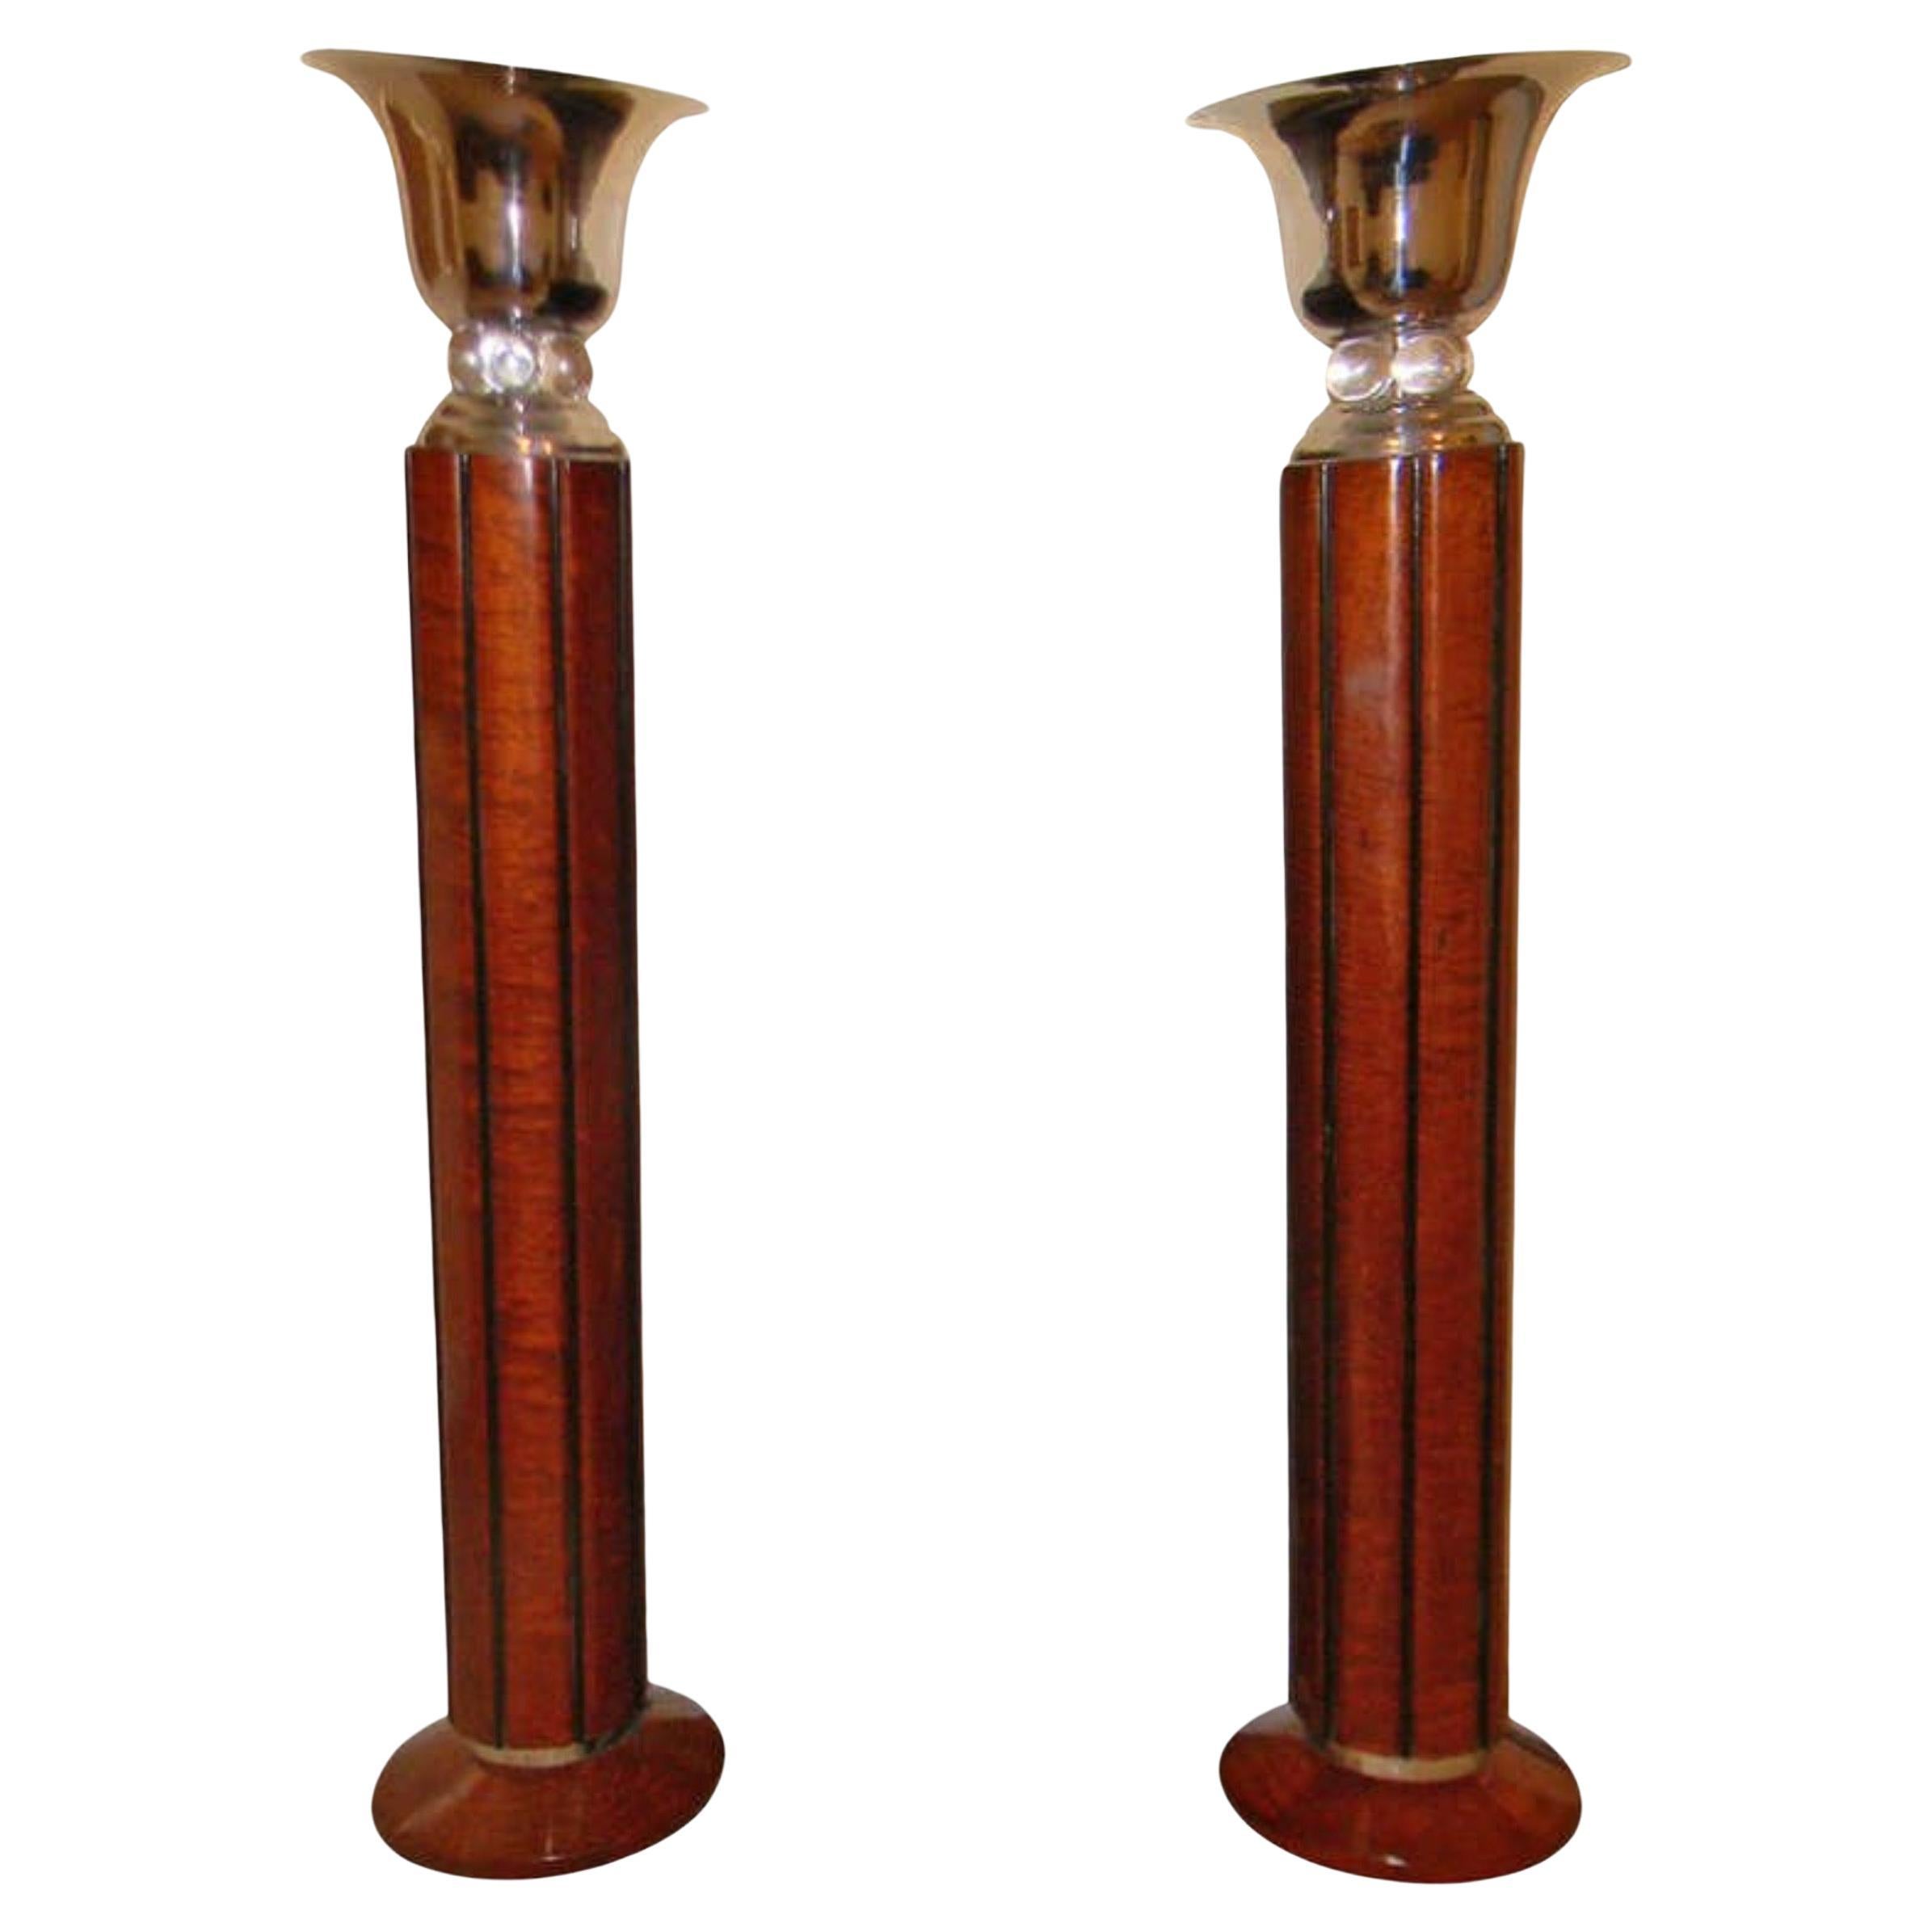 Spectacular Art Deco Floor lamps torchieres two-tone wood For Sale